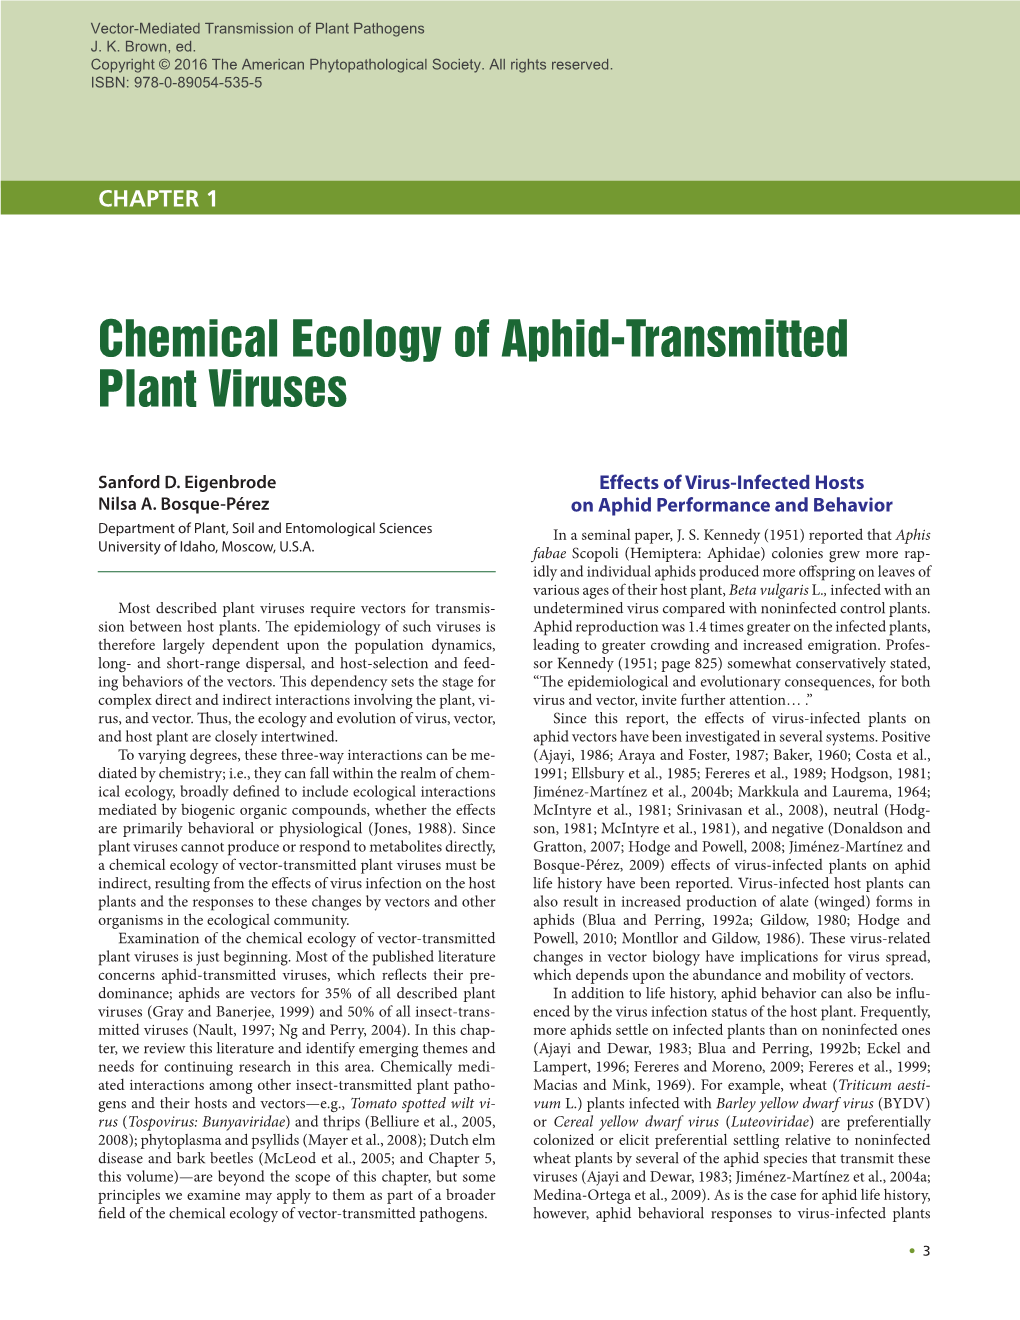 Chemical Ecology of Aphid-Transmitted Plant Viruses